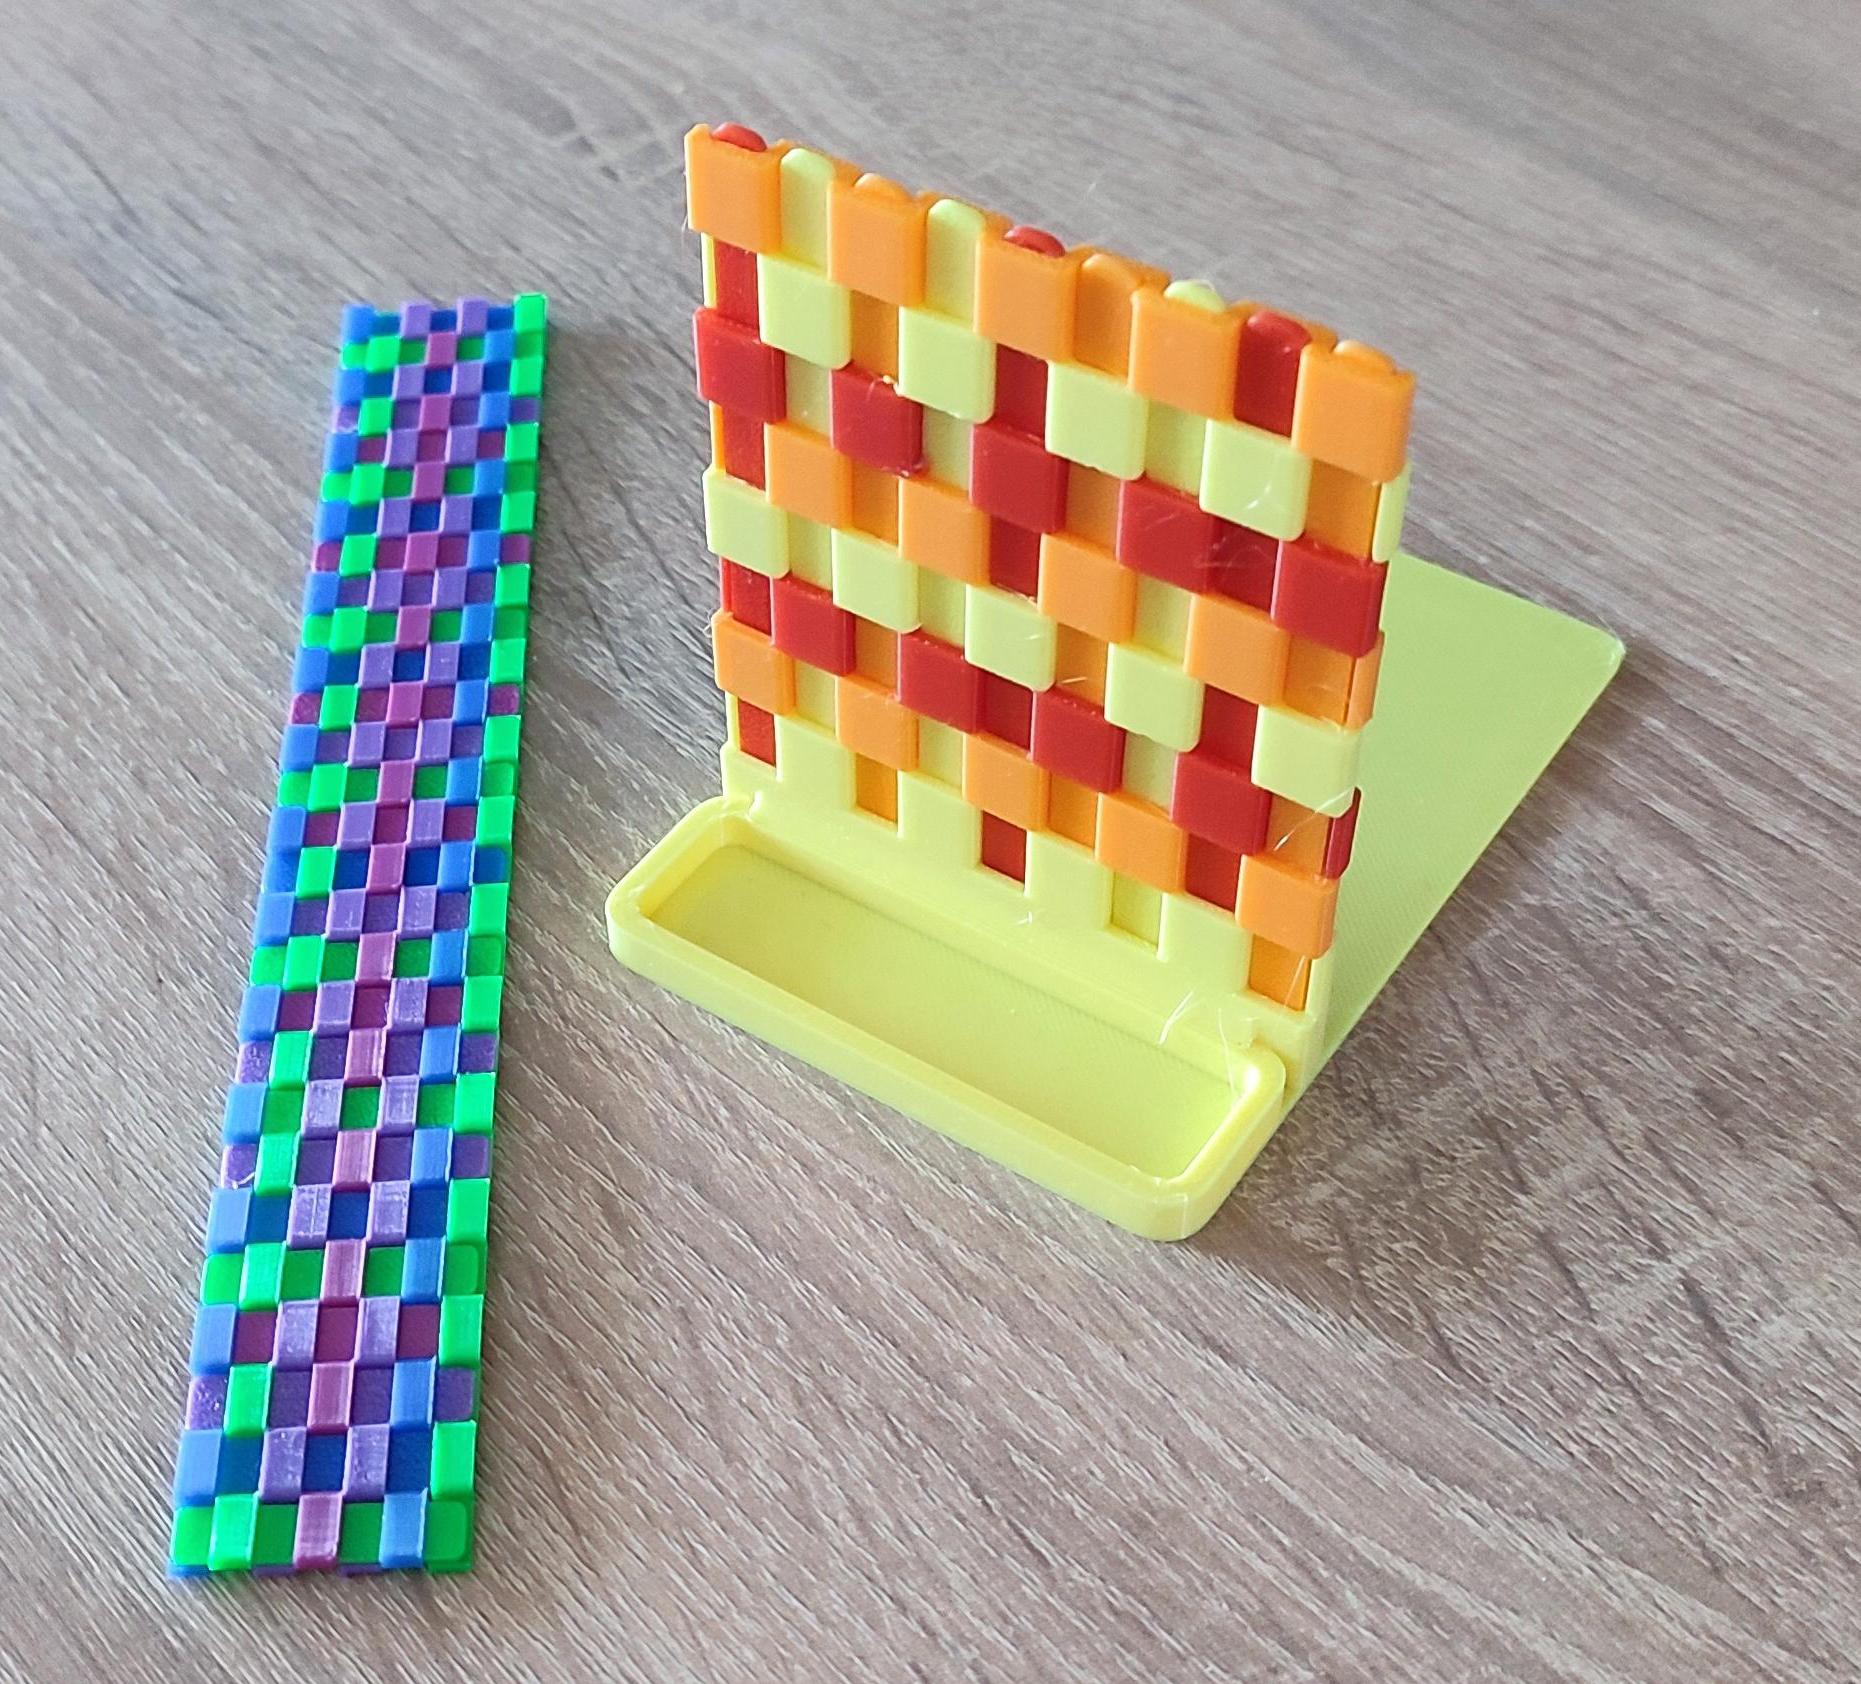 3D Printed "Woven" Bookend and Bookmark